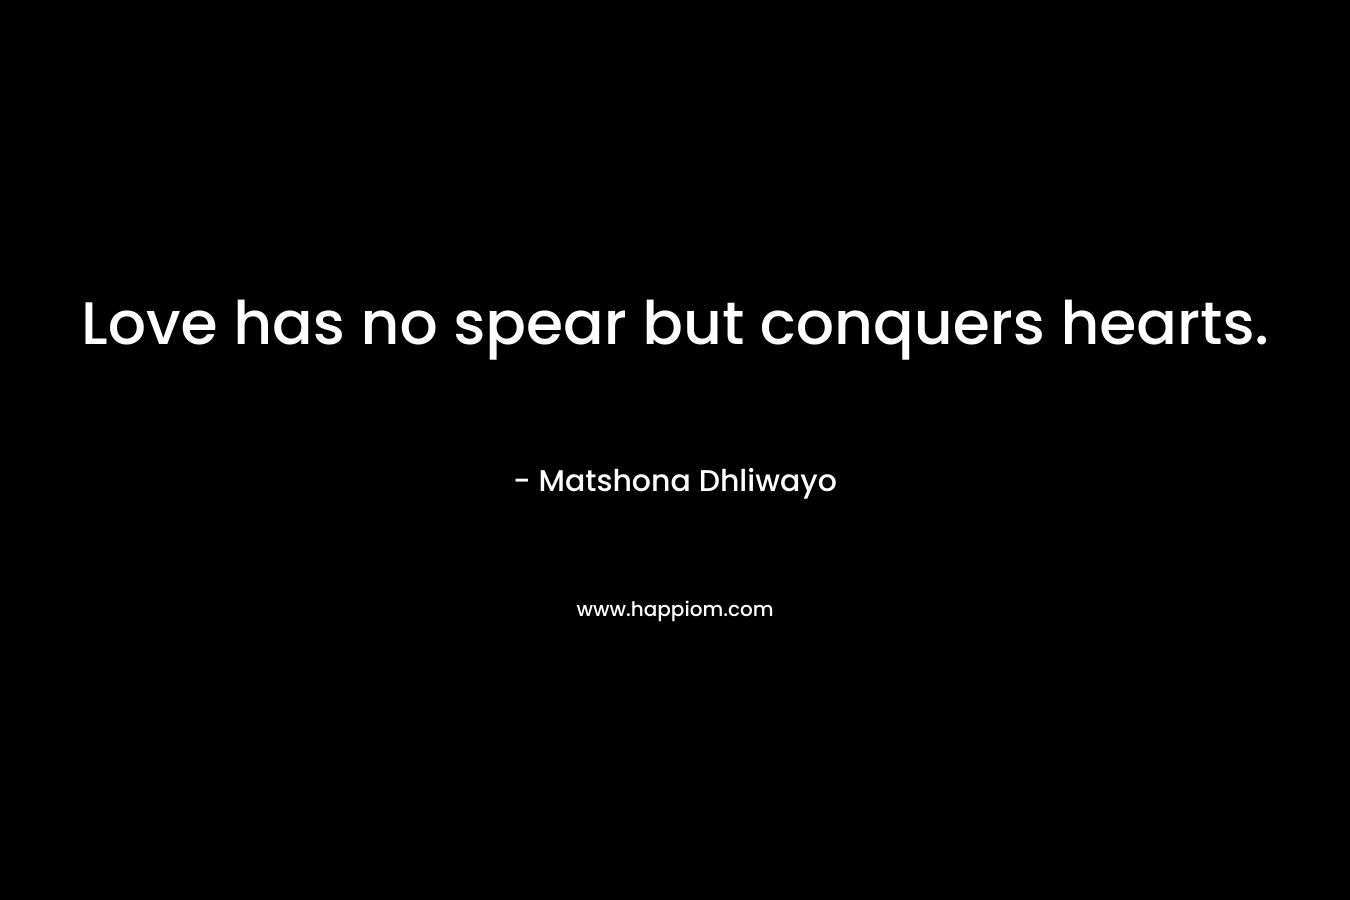 Love has no spear but conquers hearts. – Matshona Dhliwayo